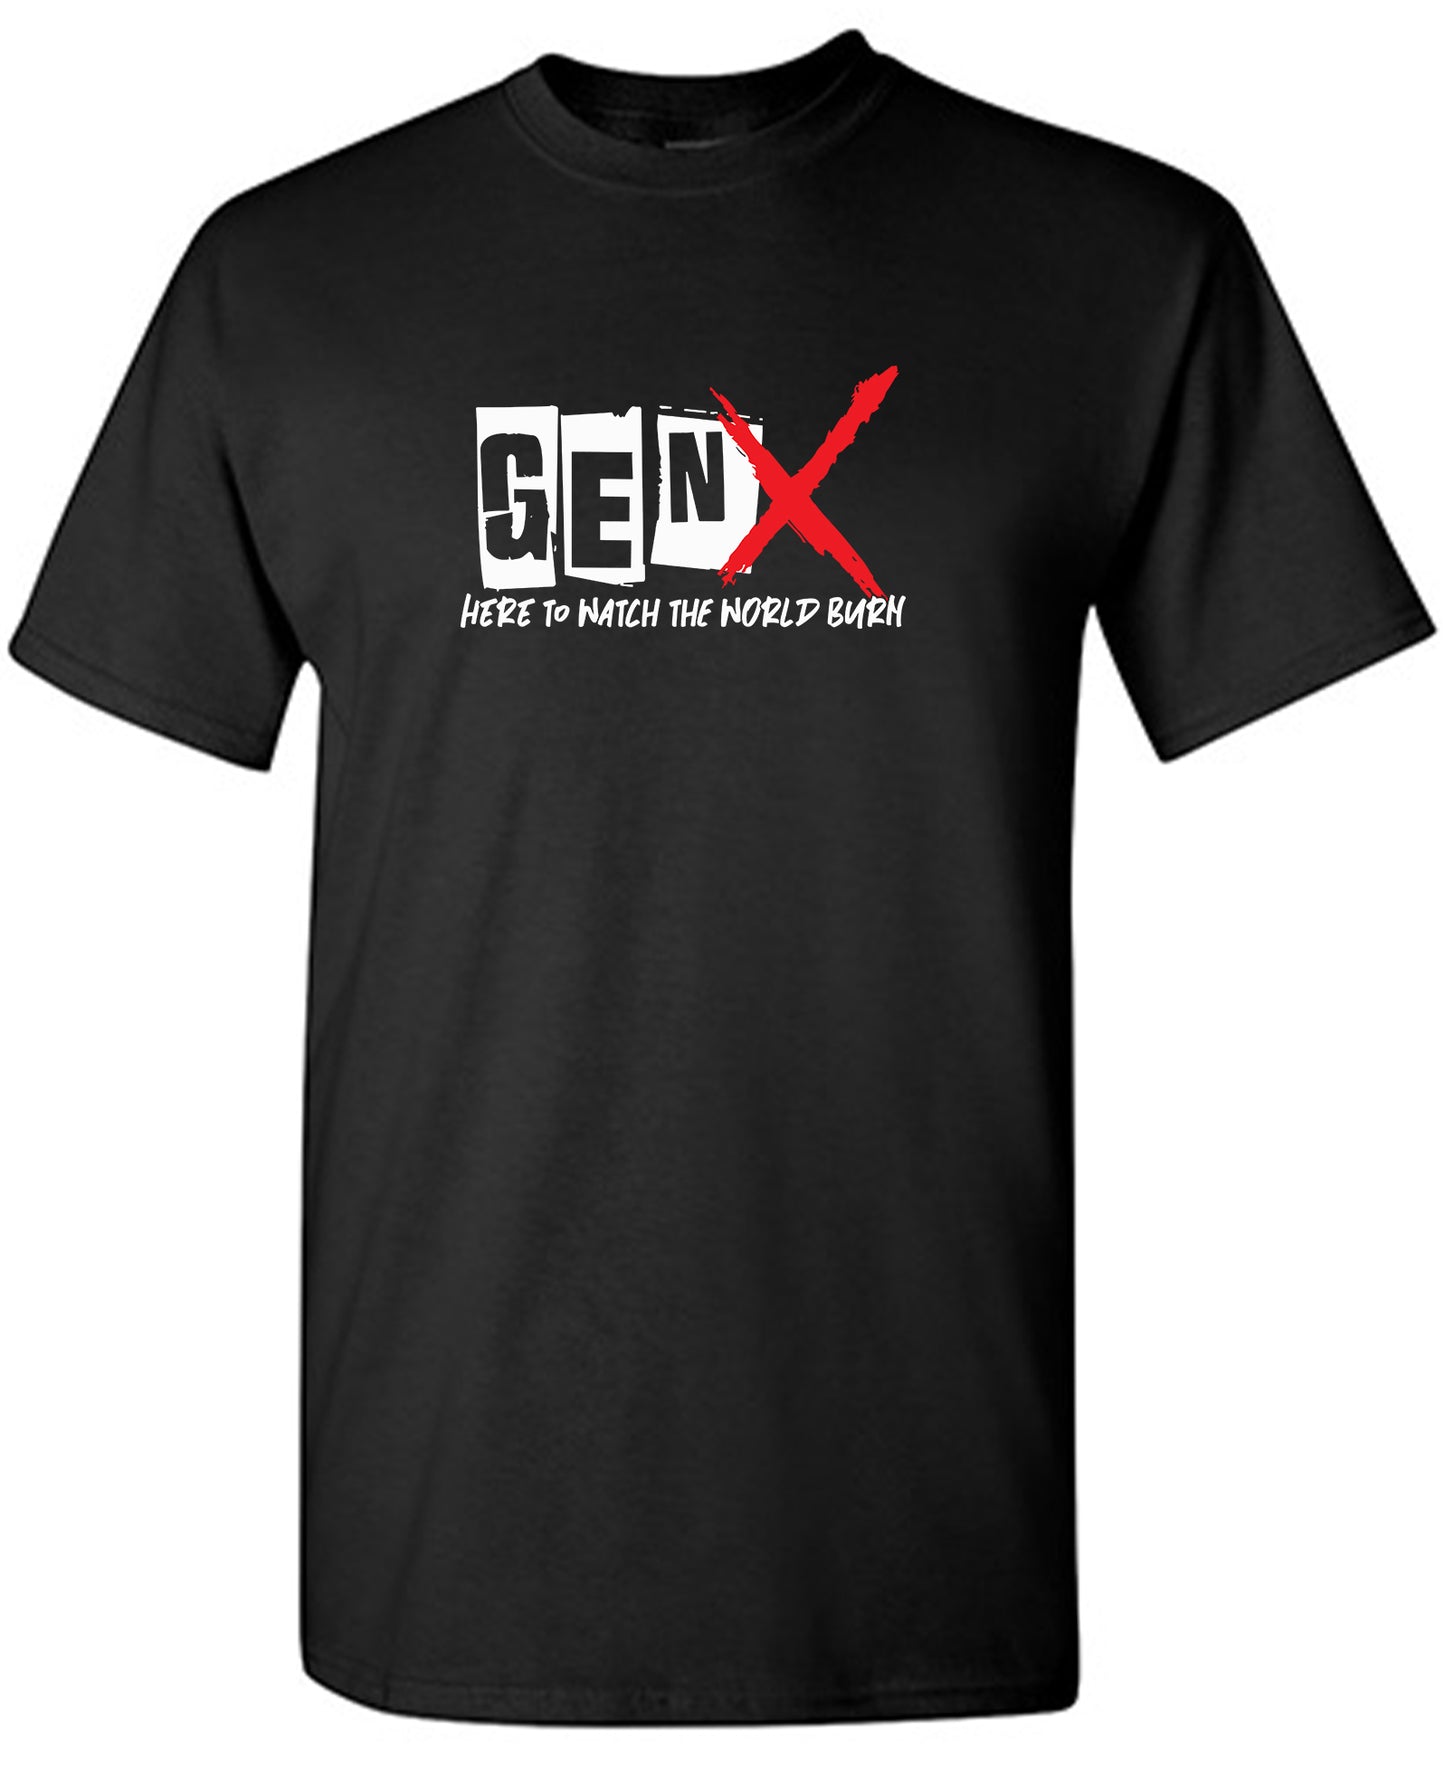 Gen X Here To Watch The World Burn - Funny T Shirts & Graphic Tees